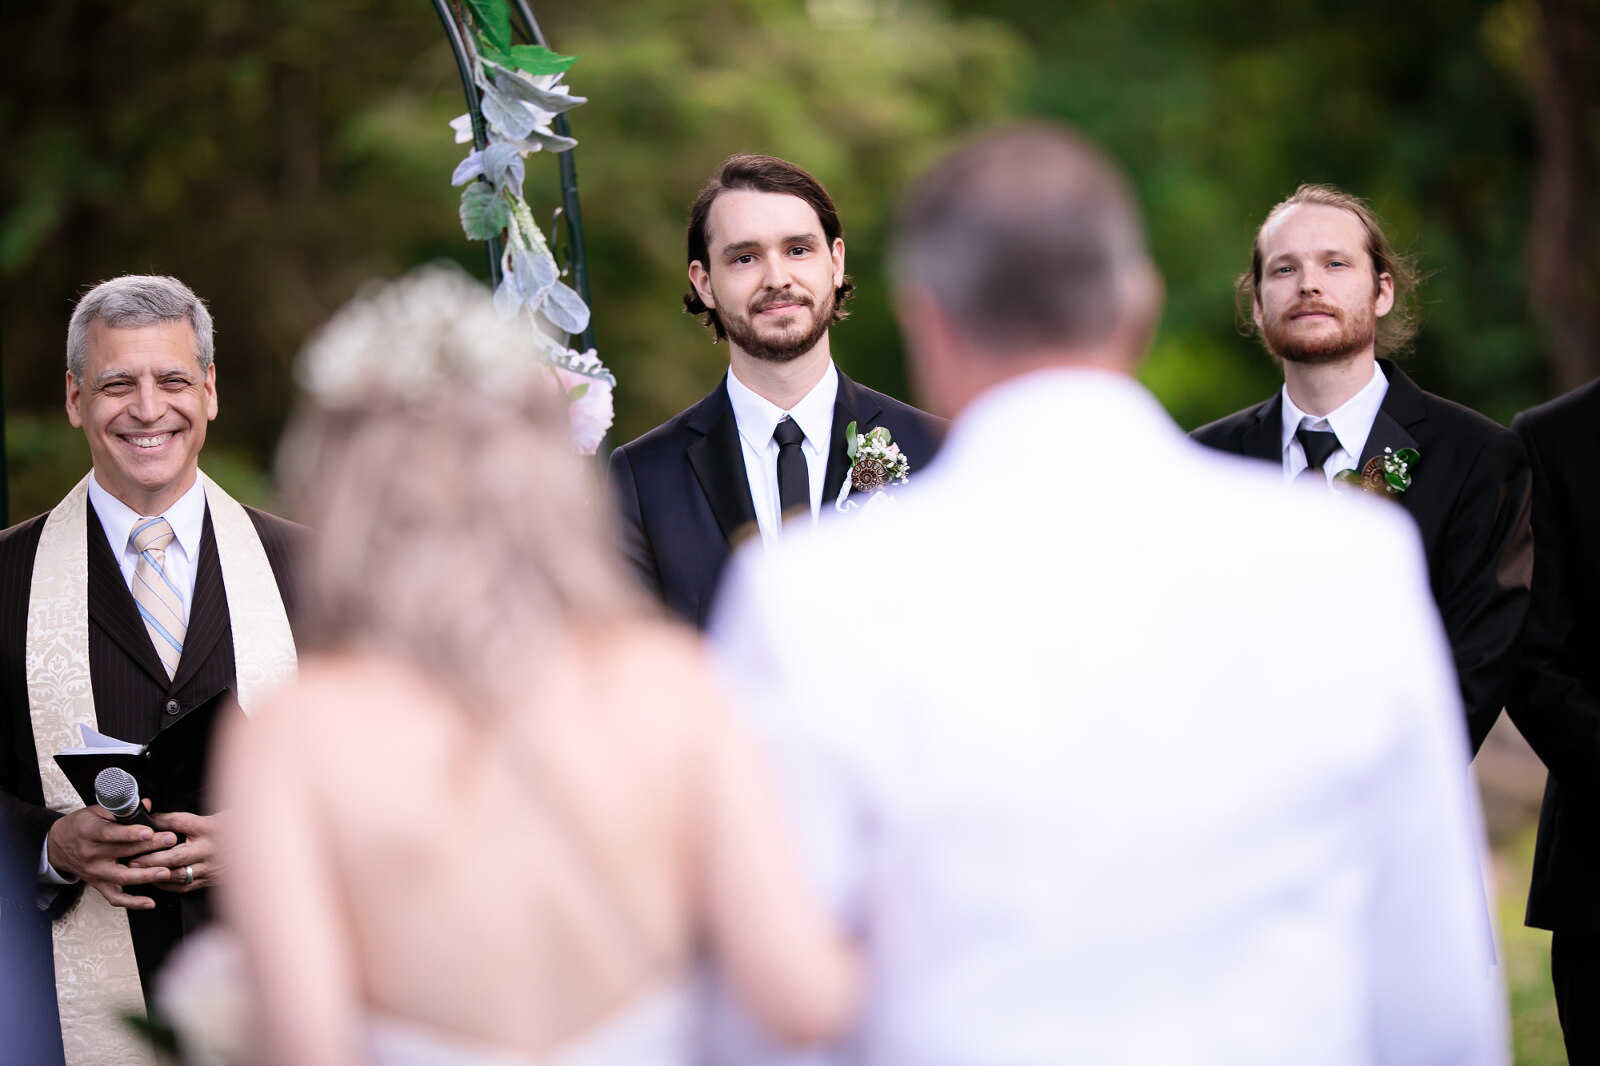 groom watches nervously as his bride is walked into the wedding ceremony at Glen Foerd